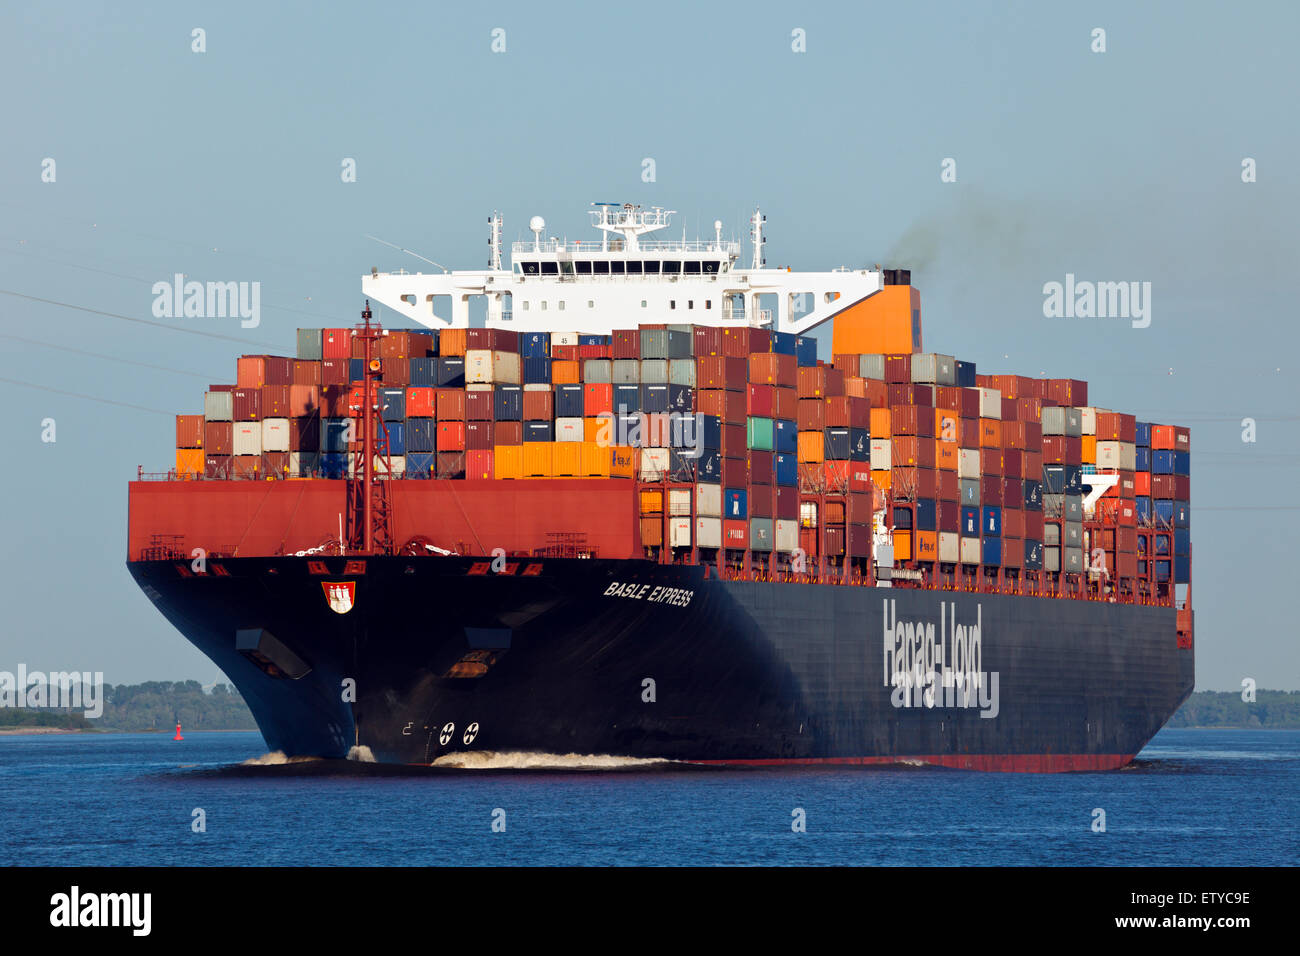 Container ship Basle Express, operated by Hapag-Lloyd, on the Elbe river near Stade Stock Photo